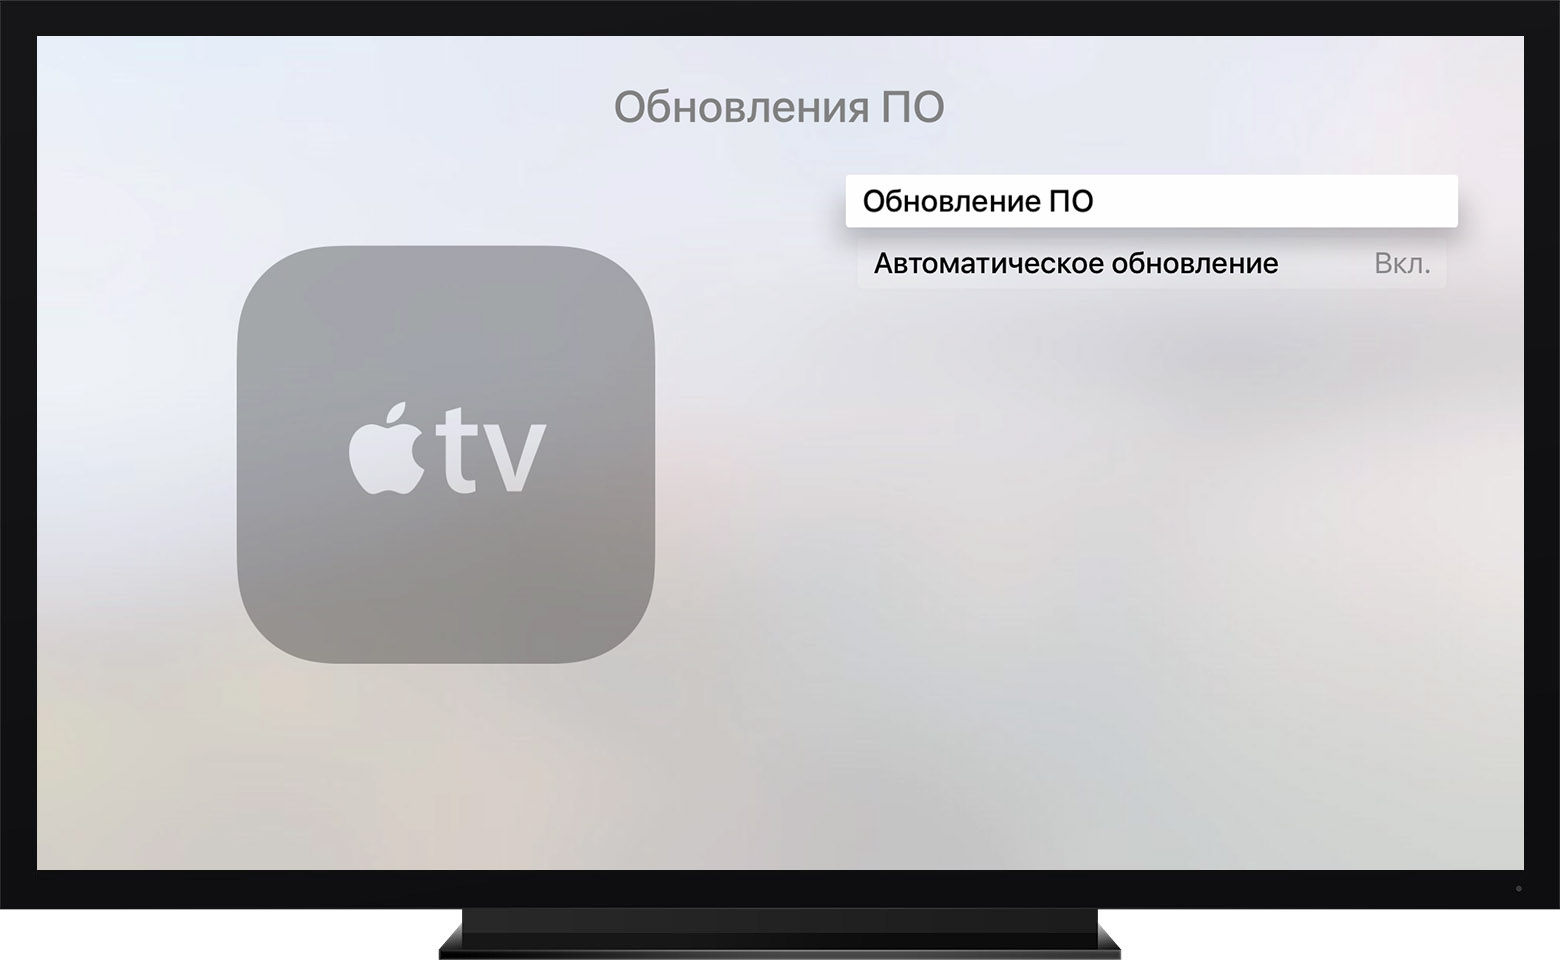 TvOS 11 beta 5 for Apple TV released to developers